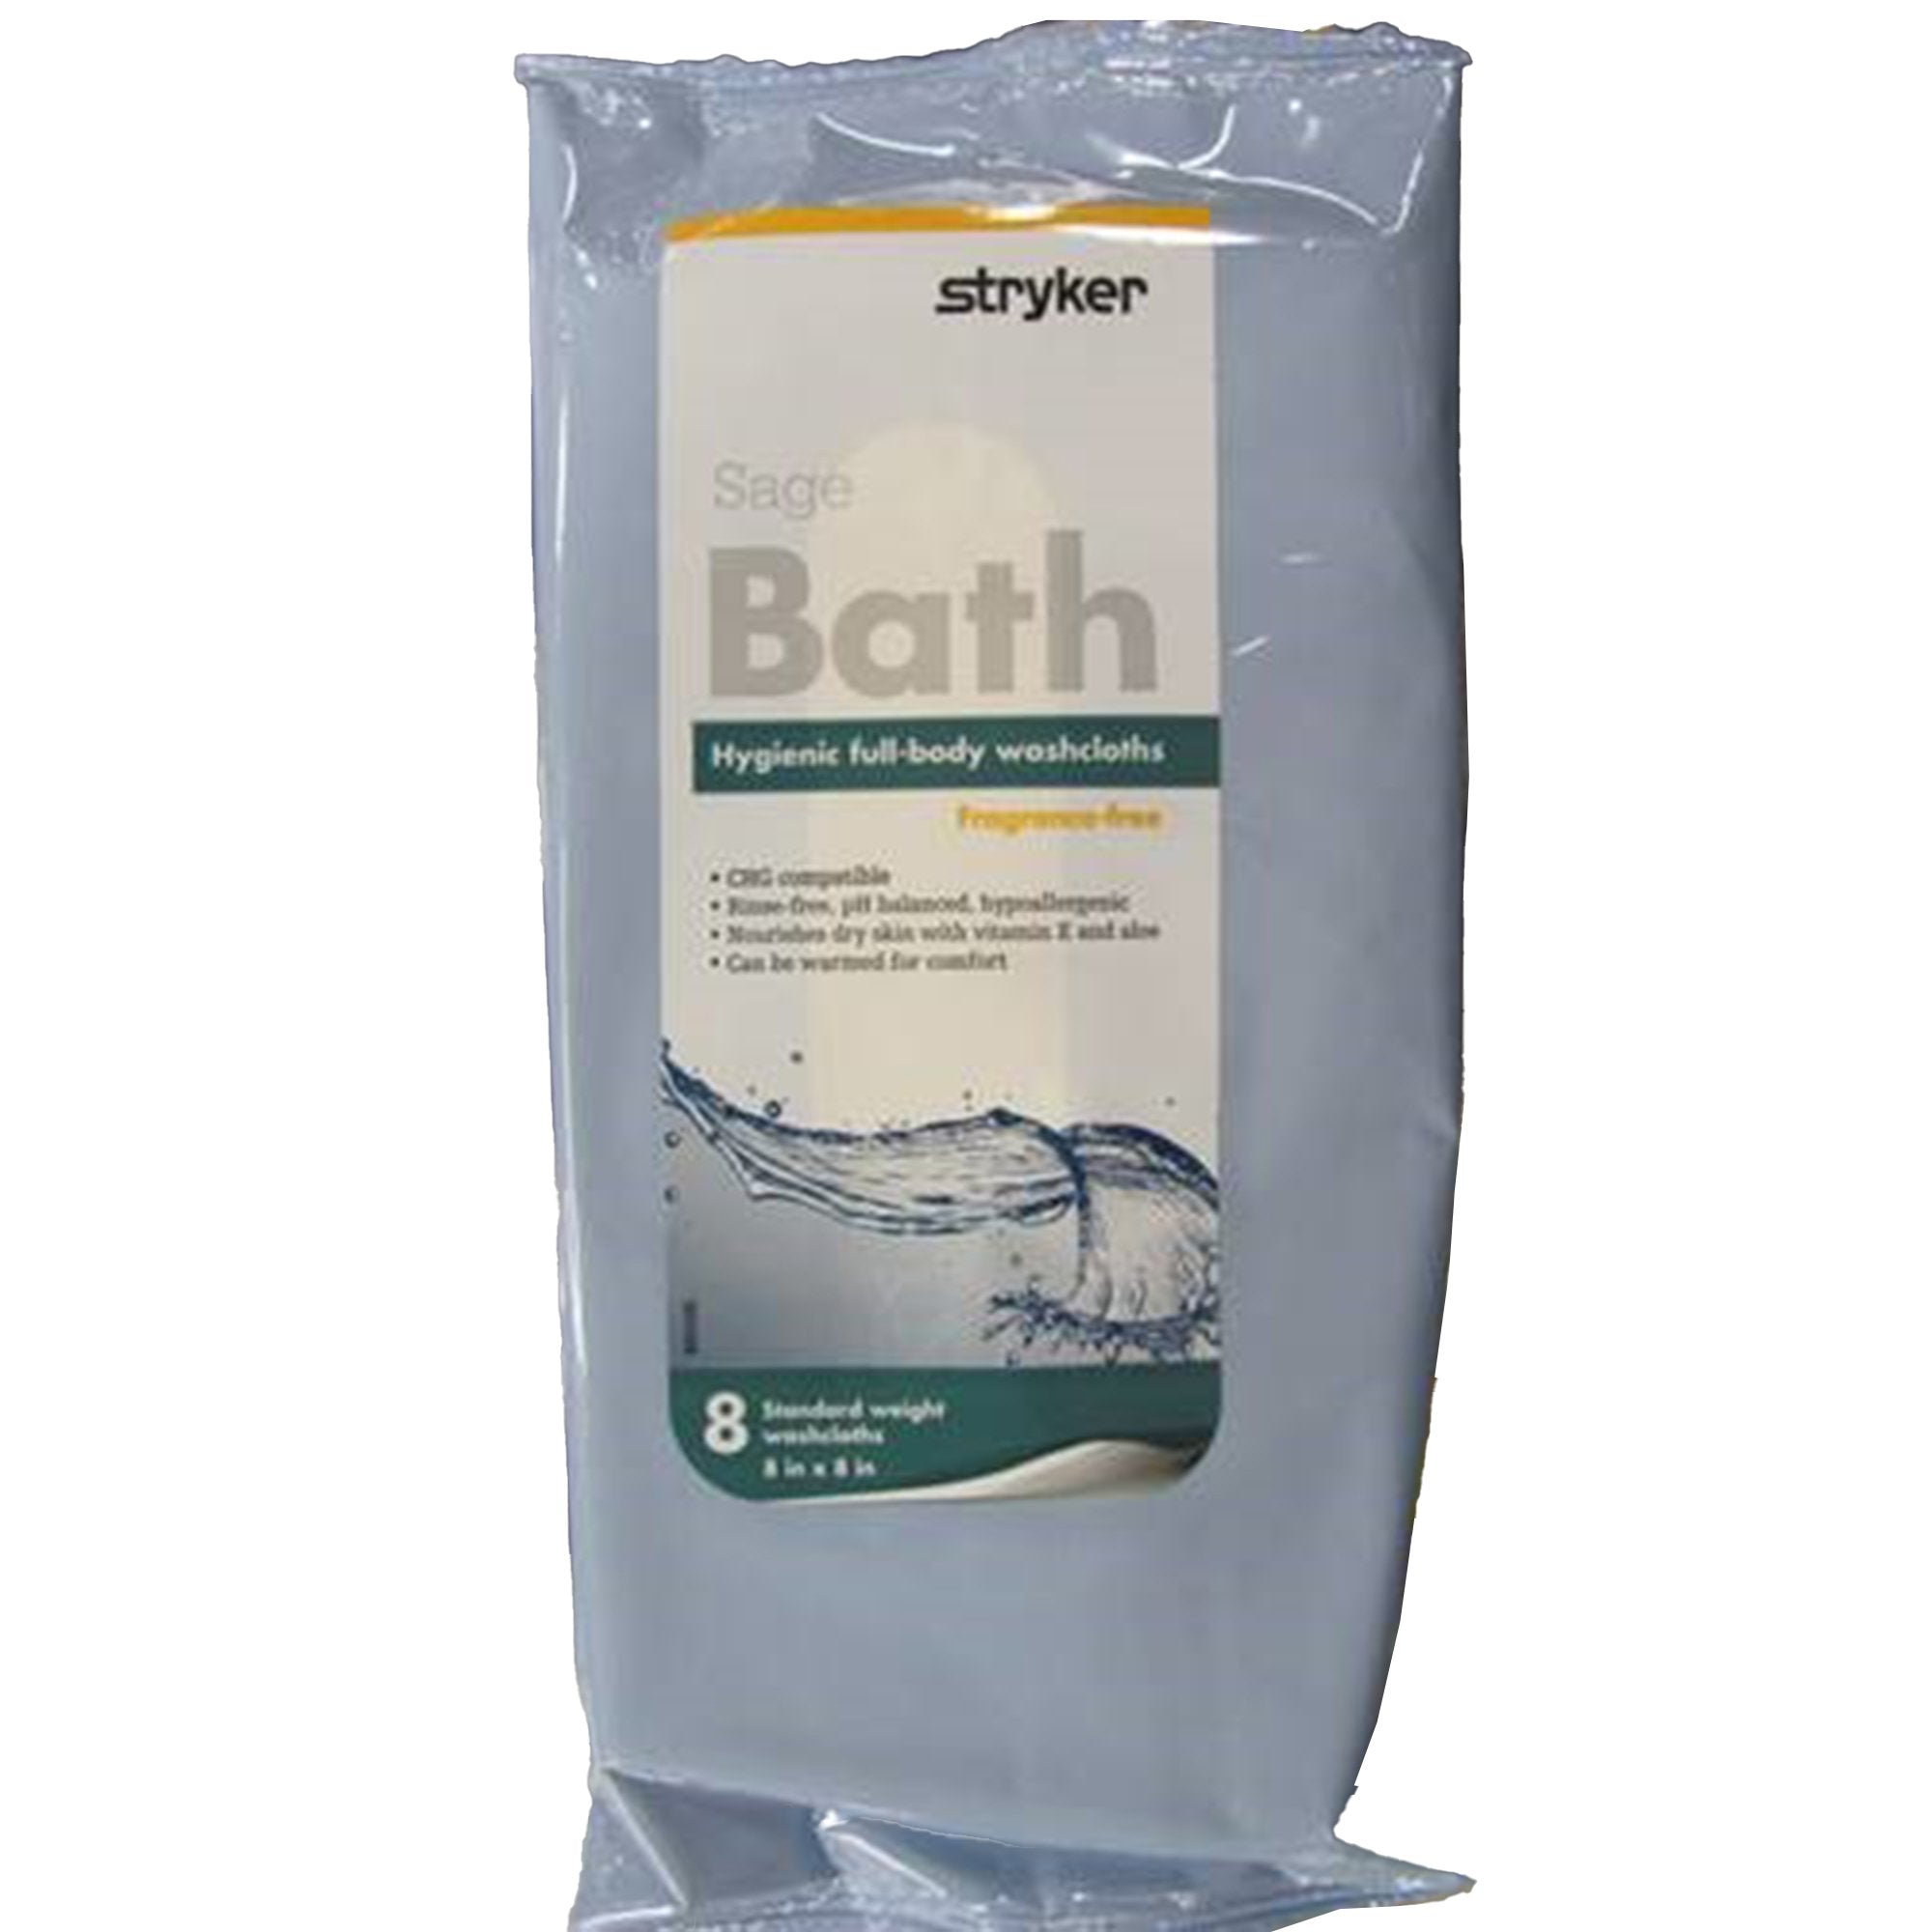 Rinse-Free Bath Wipe Sage Bath Soft Pack Purified Water / Methylpropanediol / Glycerin / Aloe Unscented 8 Count